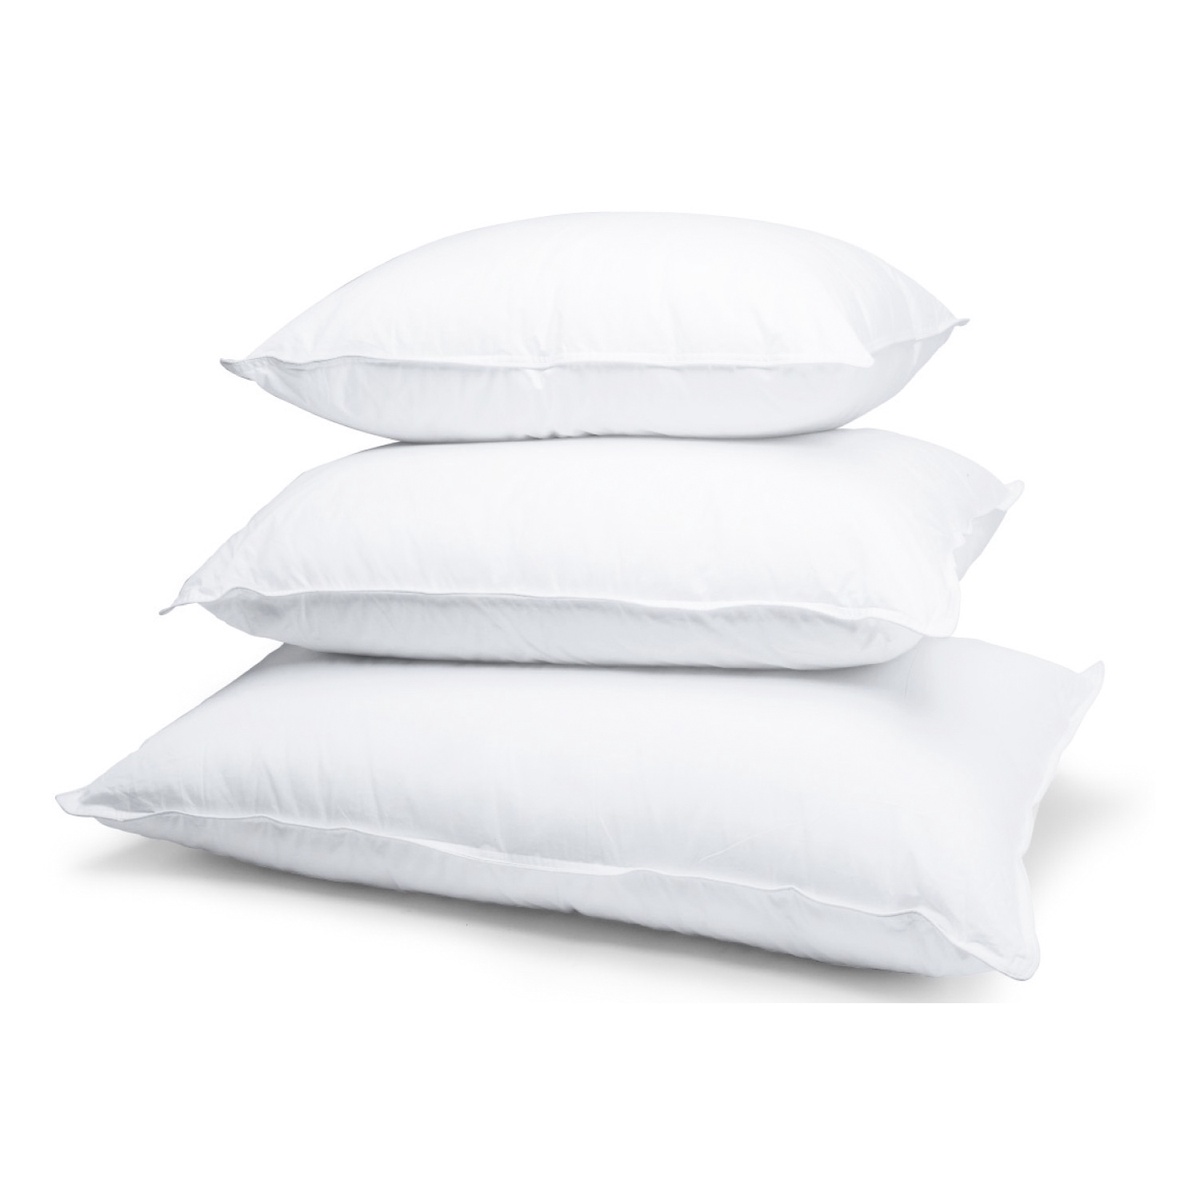 Buy Customizable Pillows Online for Individual Needs